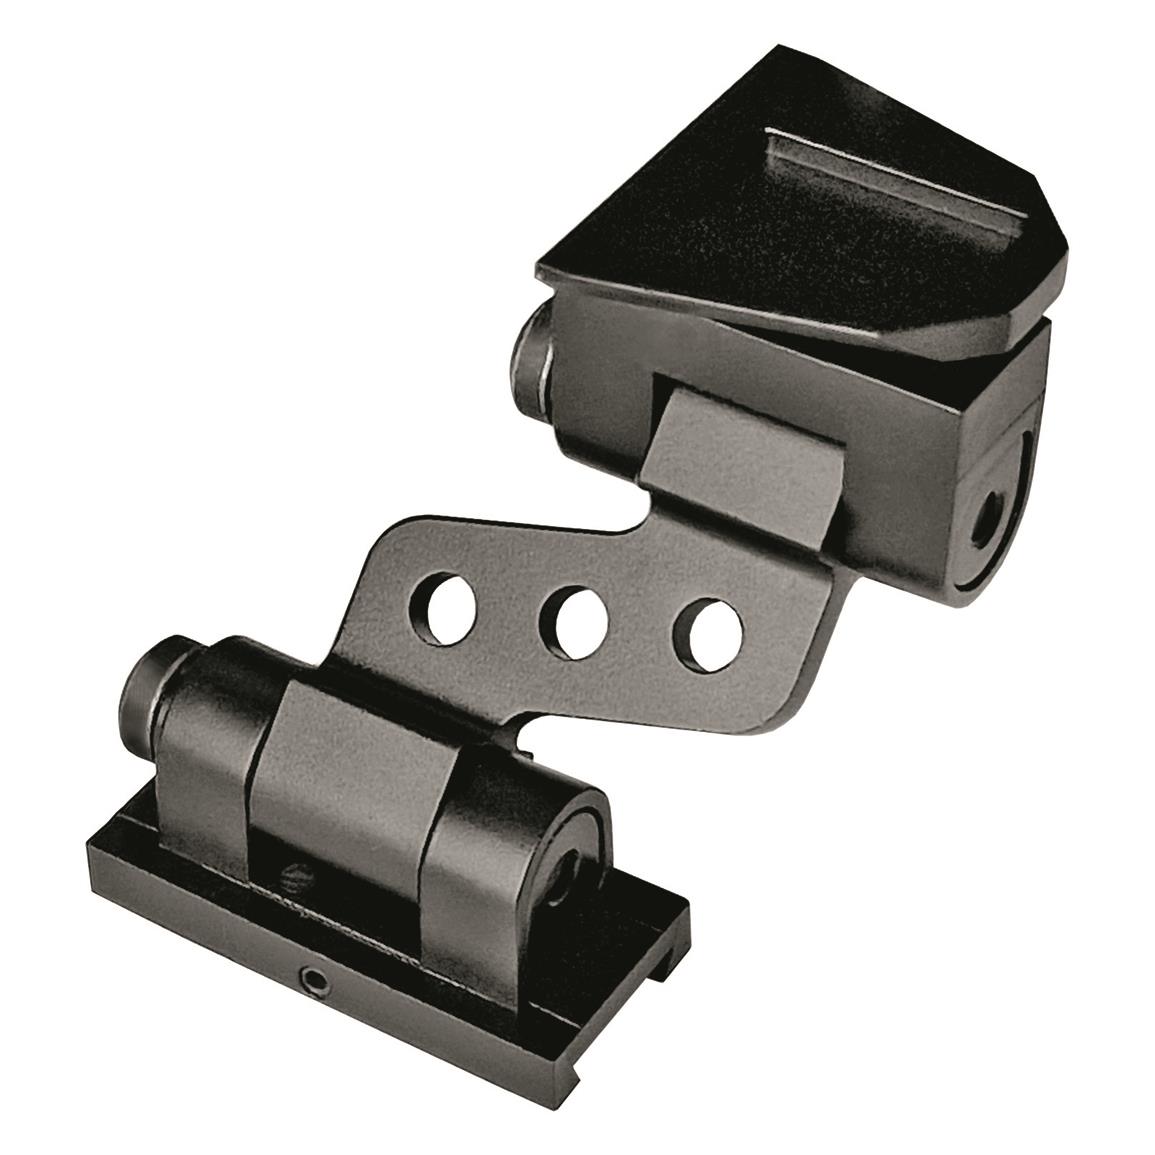 ATN J-Arm Dovetail Adapter for Odin LT Thermal Monocular